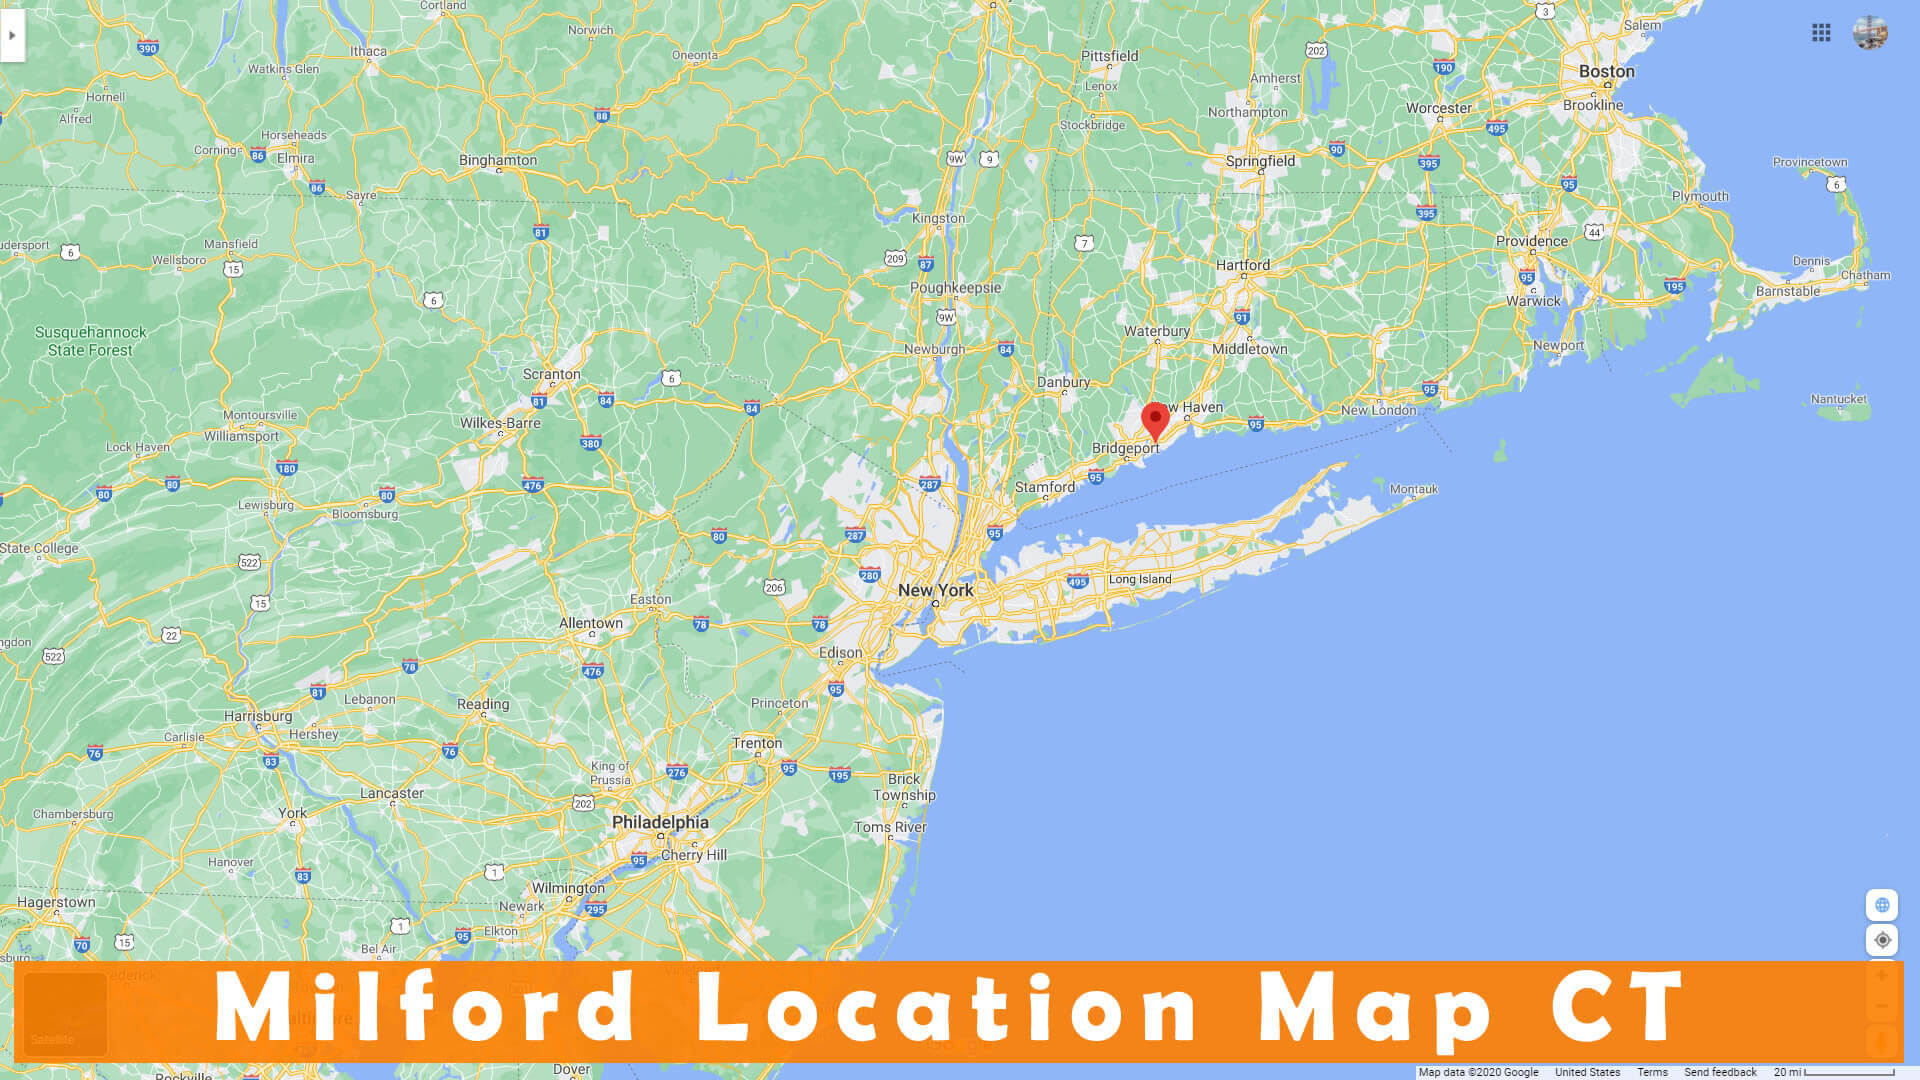 Milford Location Map CT